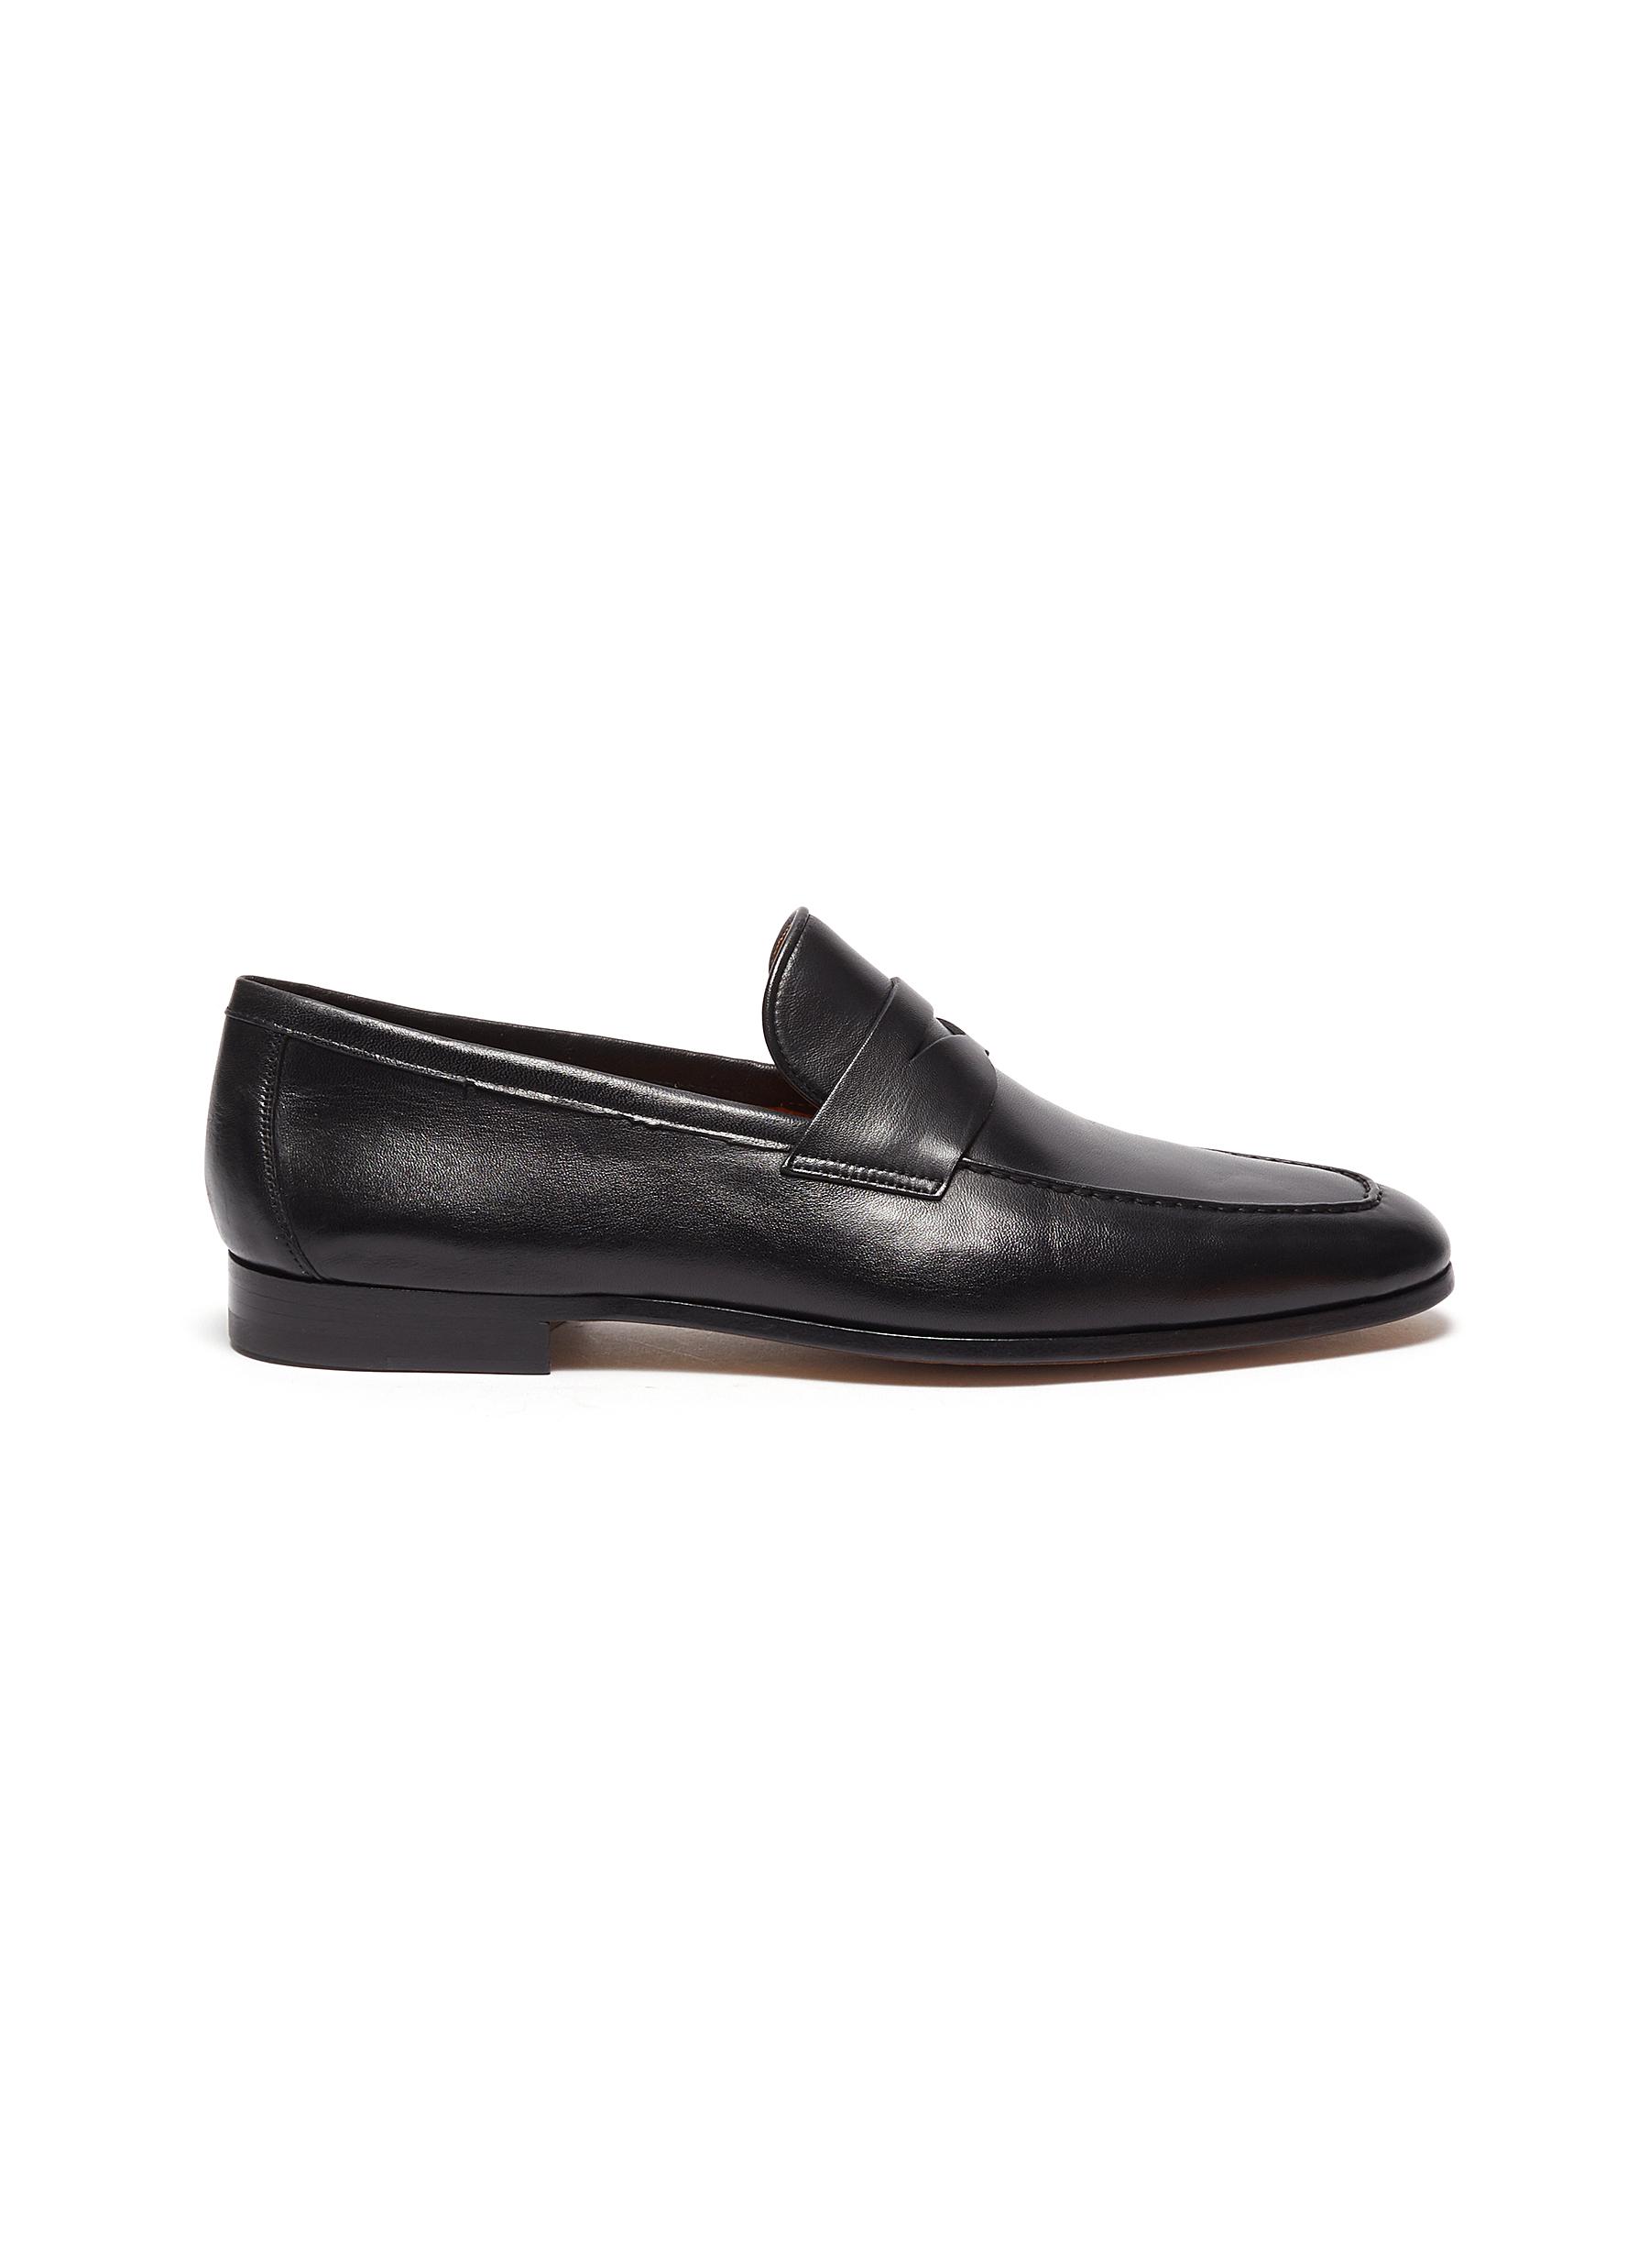 MAGNANNI Leather penny loafer